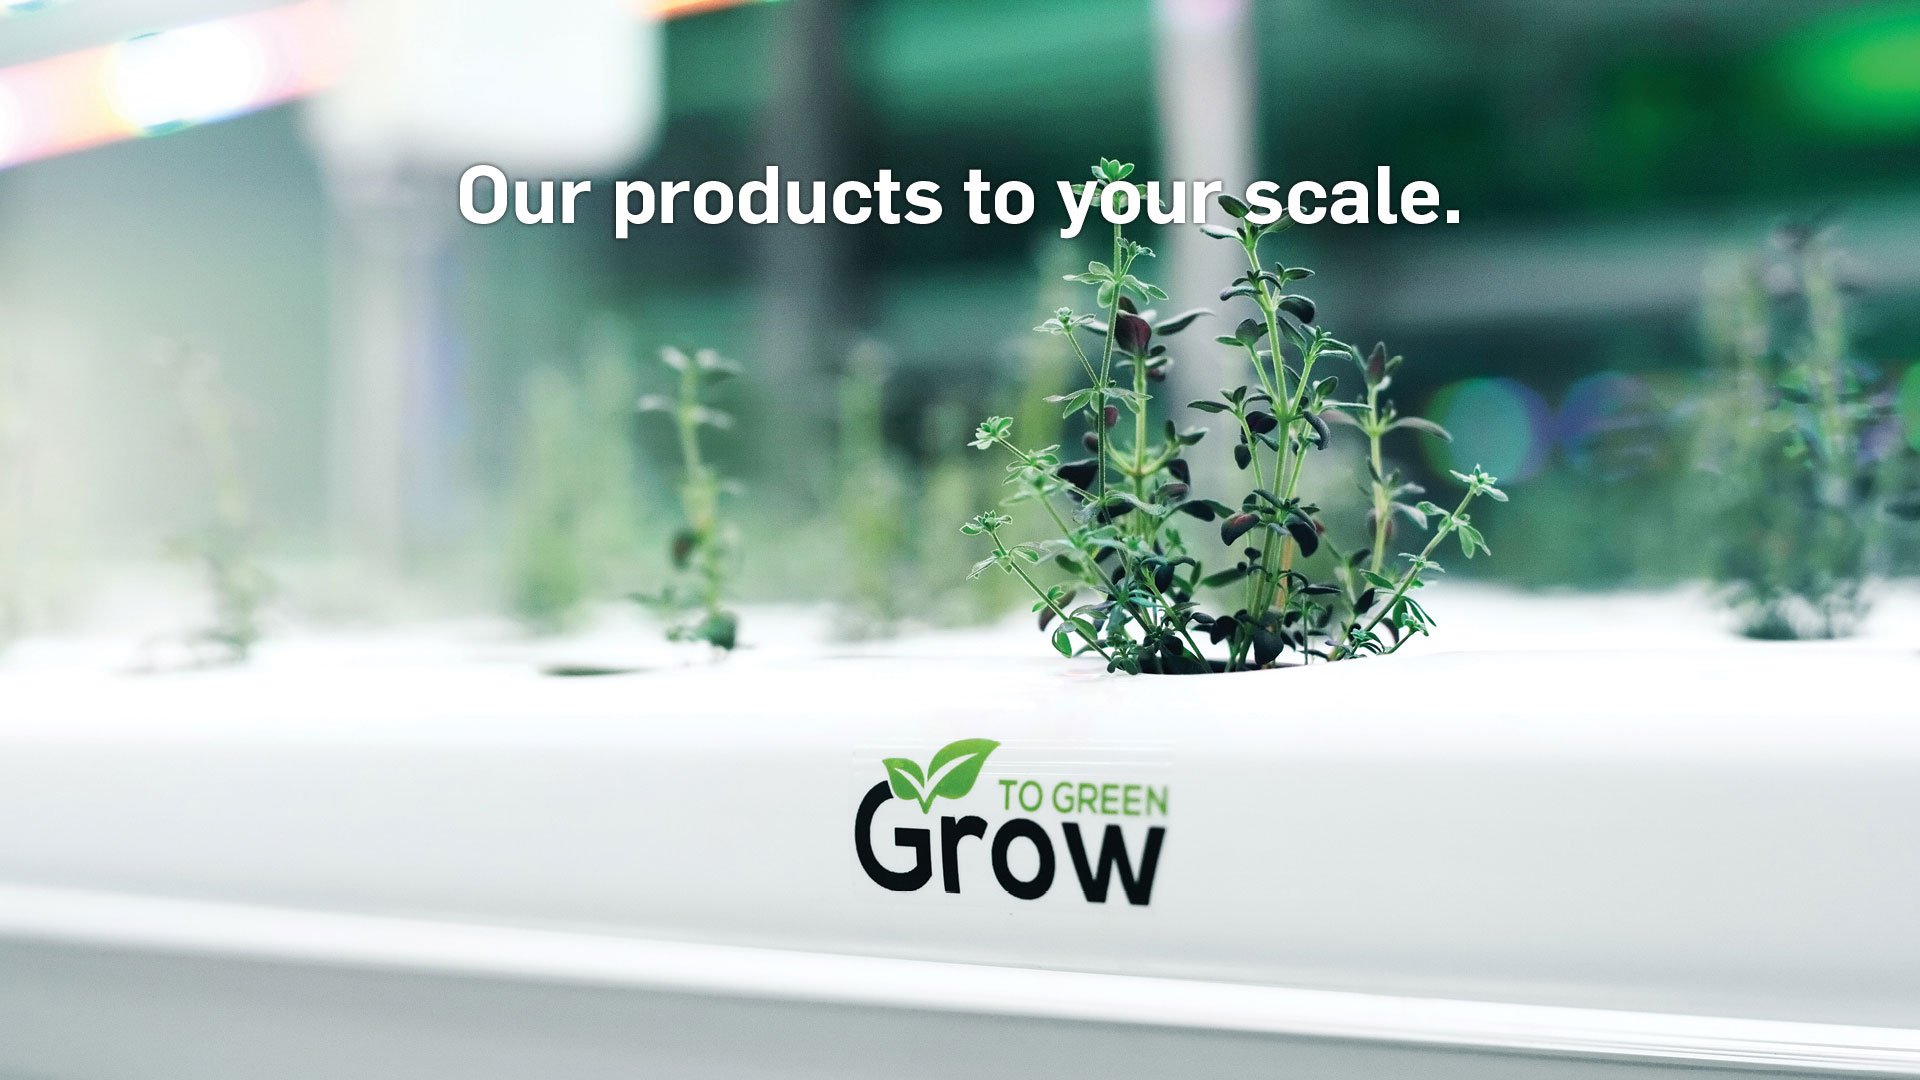 Our products to your scale2